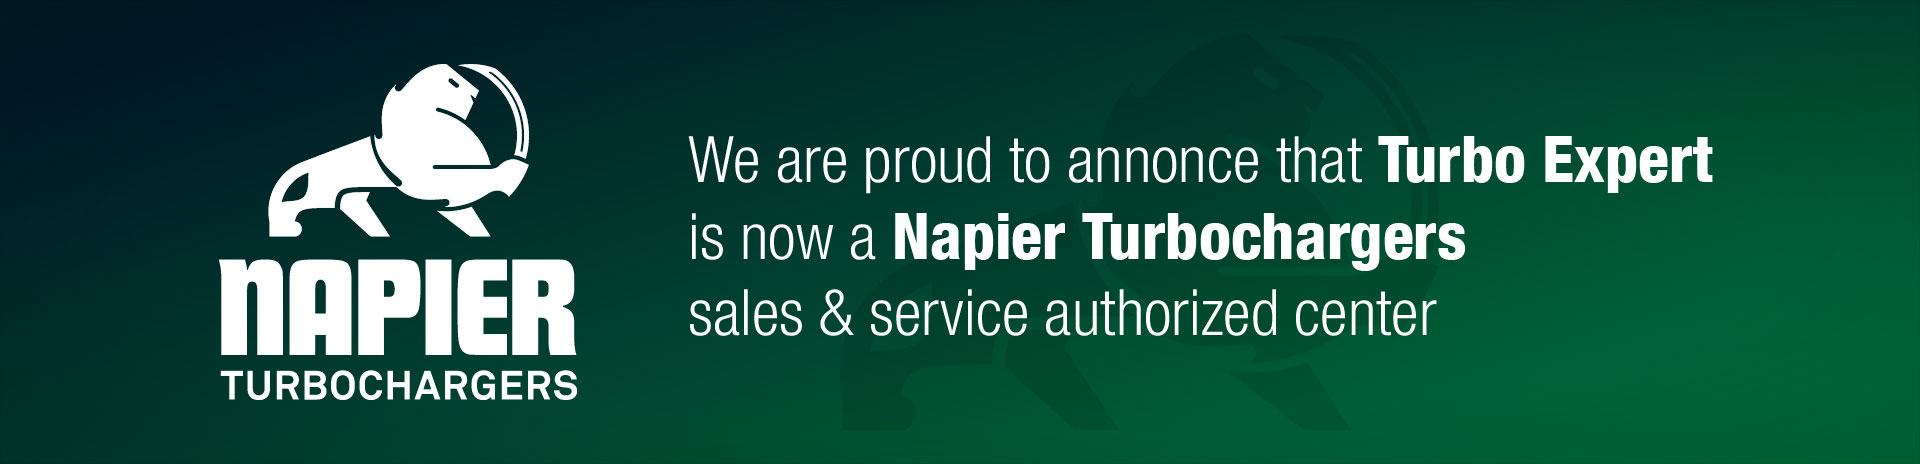 We are proud to annonce that Turbo Expert is now a Napier Turbochargers sales & service authorized center